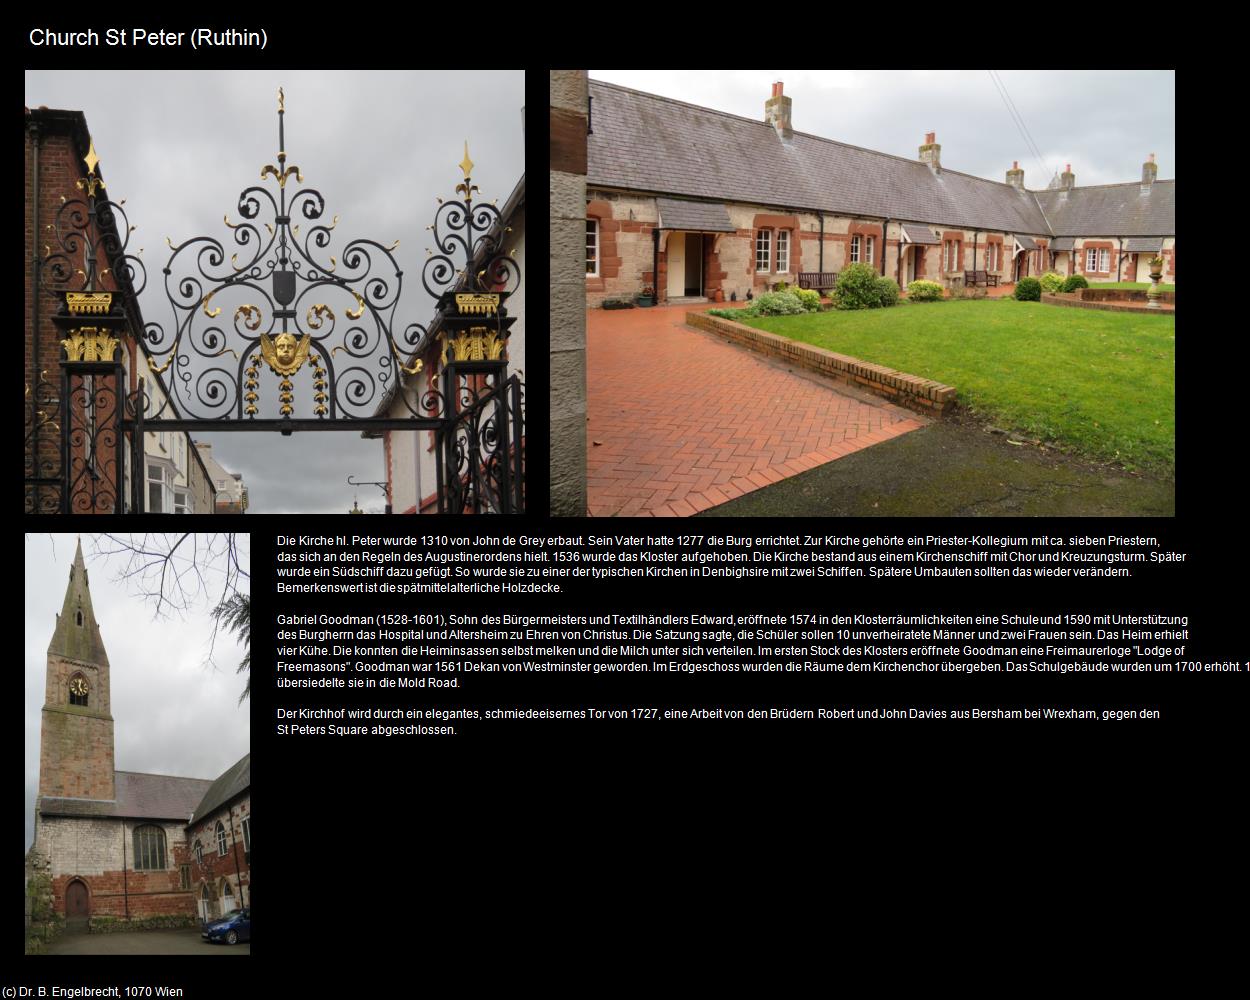 Church St Peter  (Ruthin, Wales) in Kulturatlas-ENGLAND und WALES